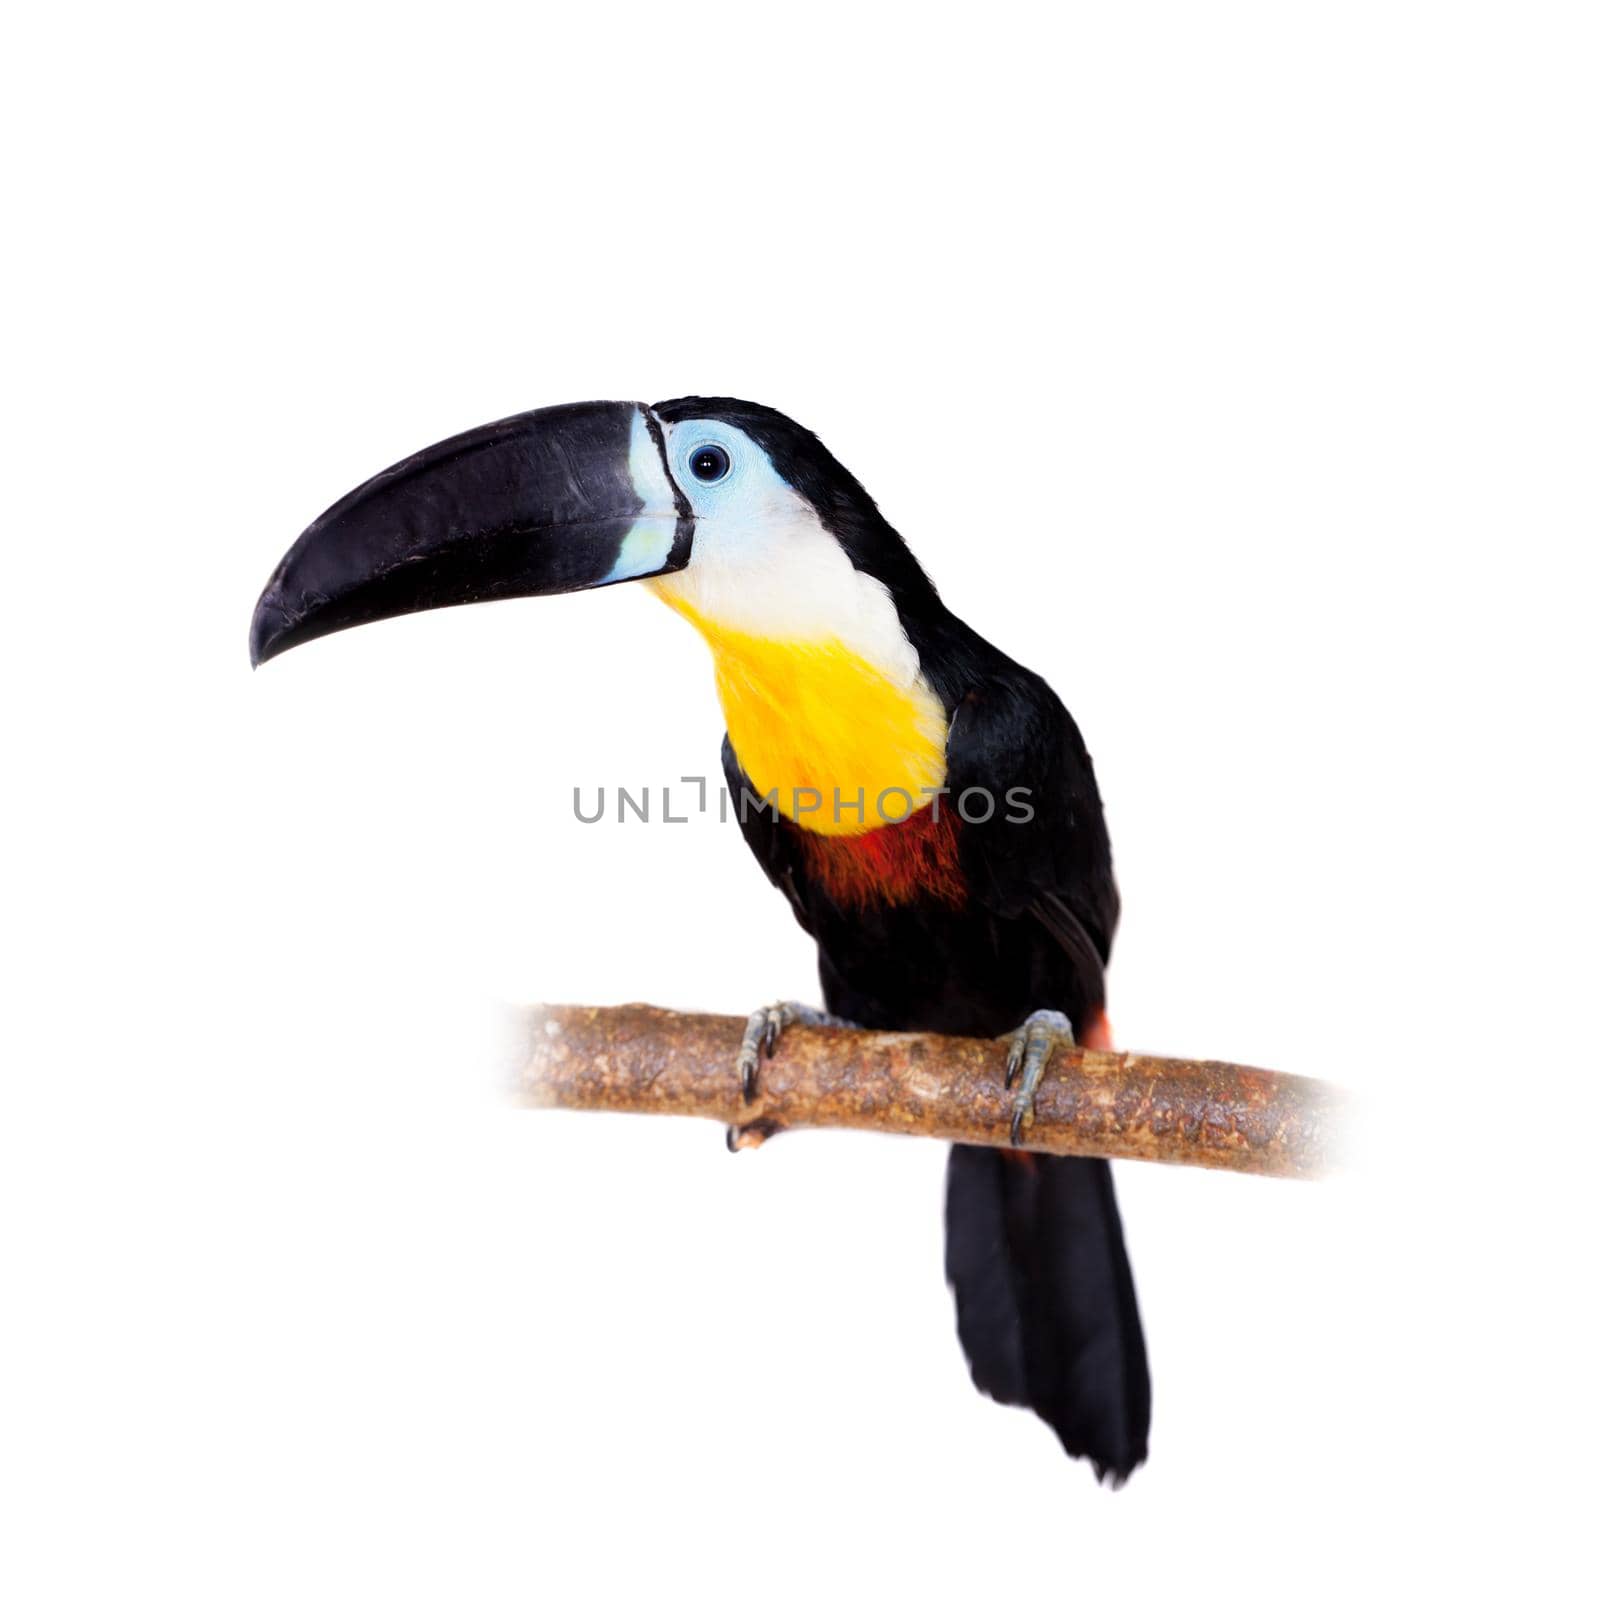 Channel-billed toucan, Ramphastos vitellinus, isolated on white background